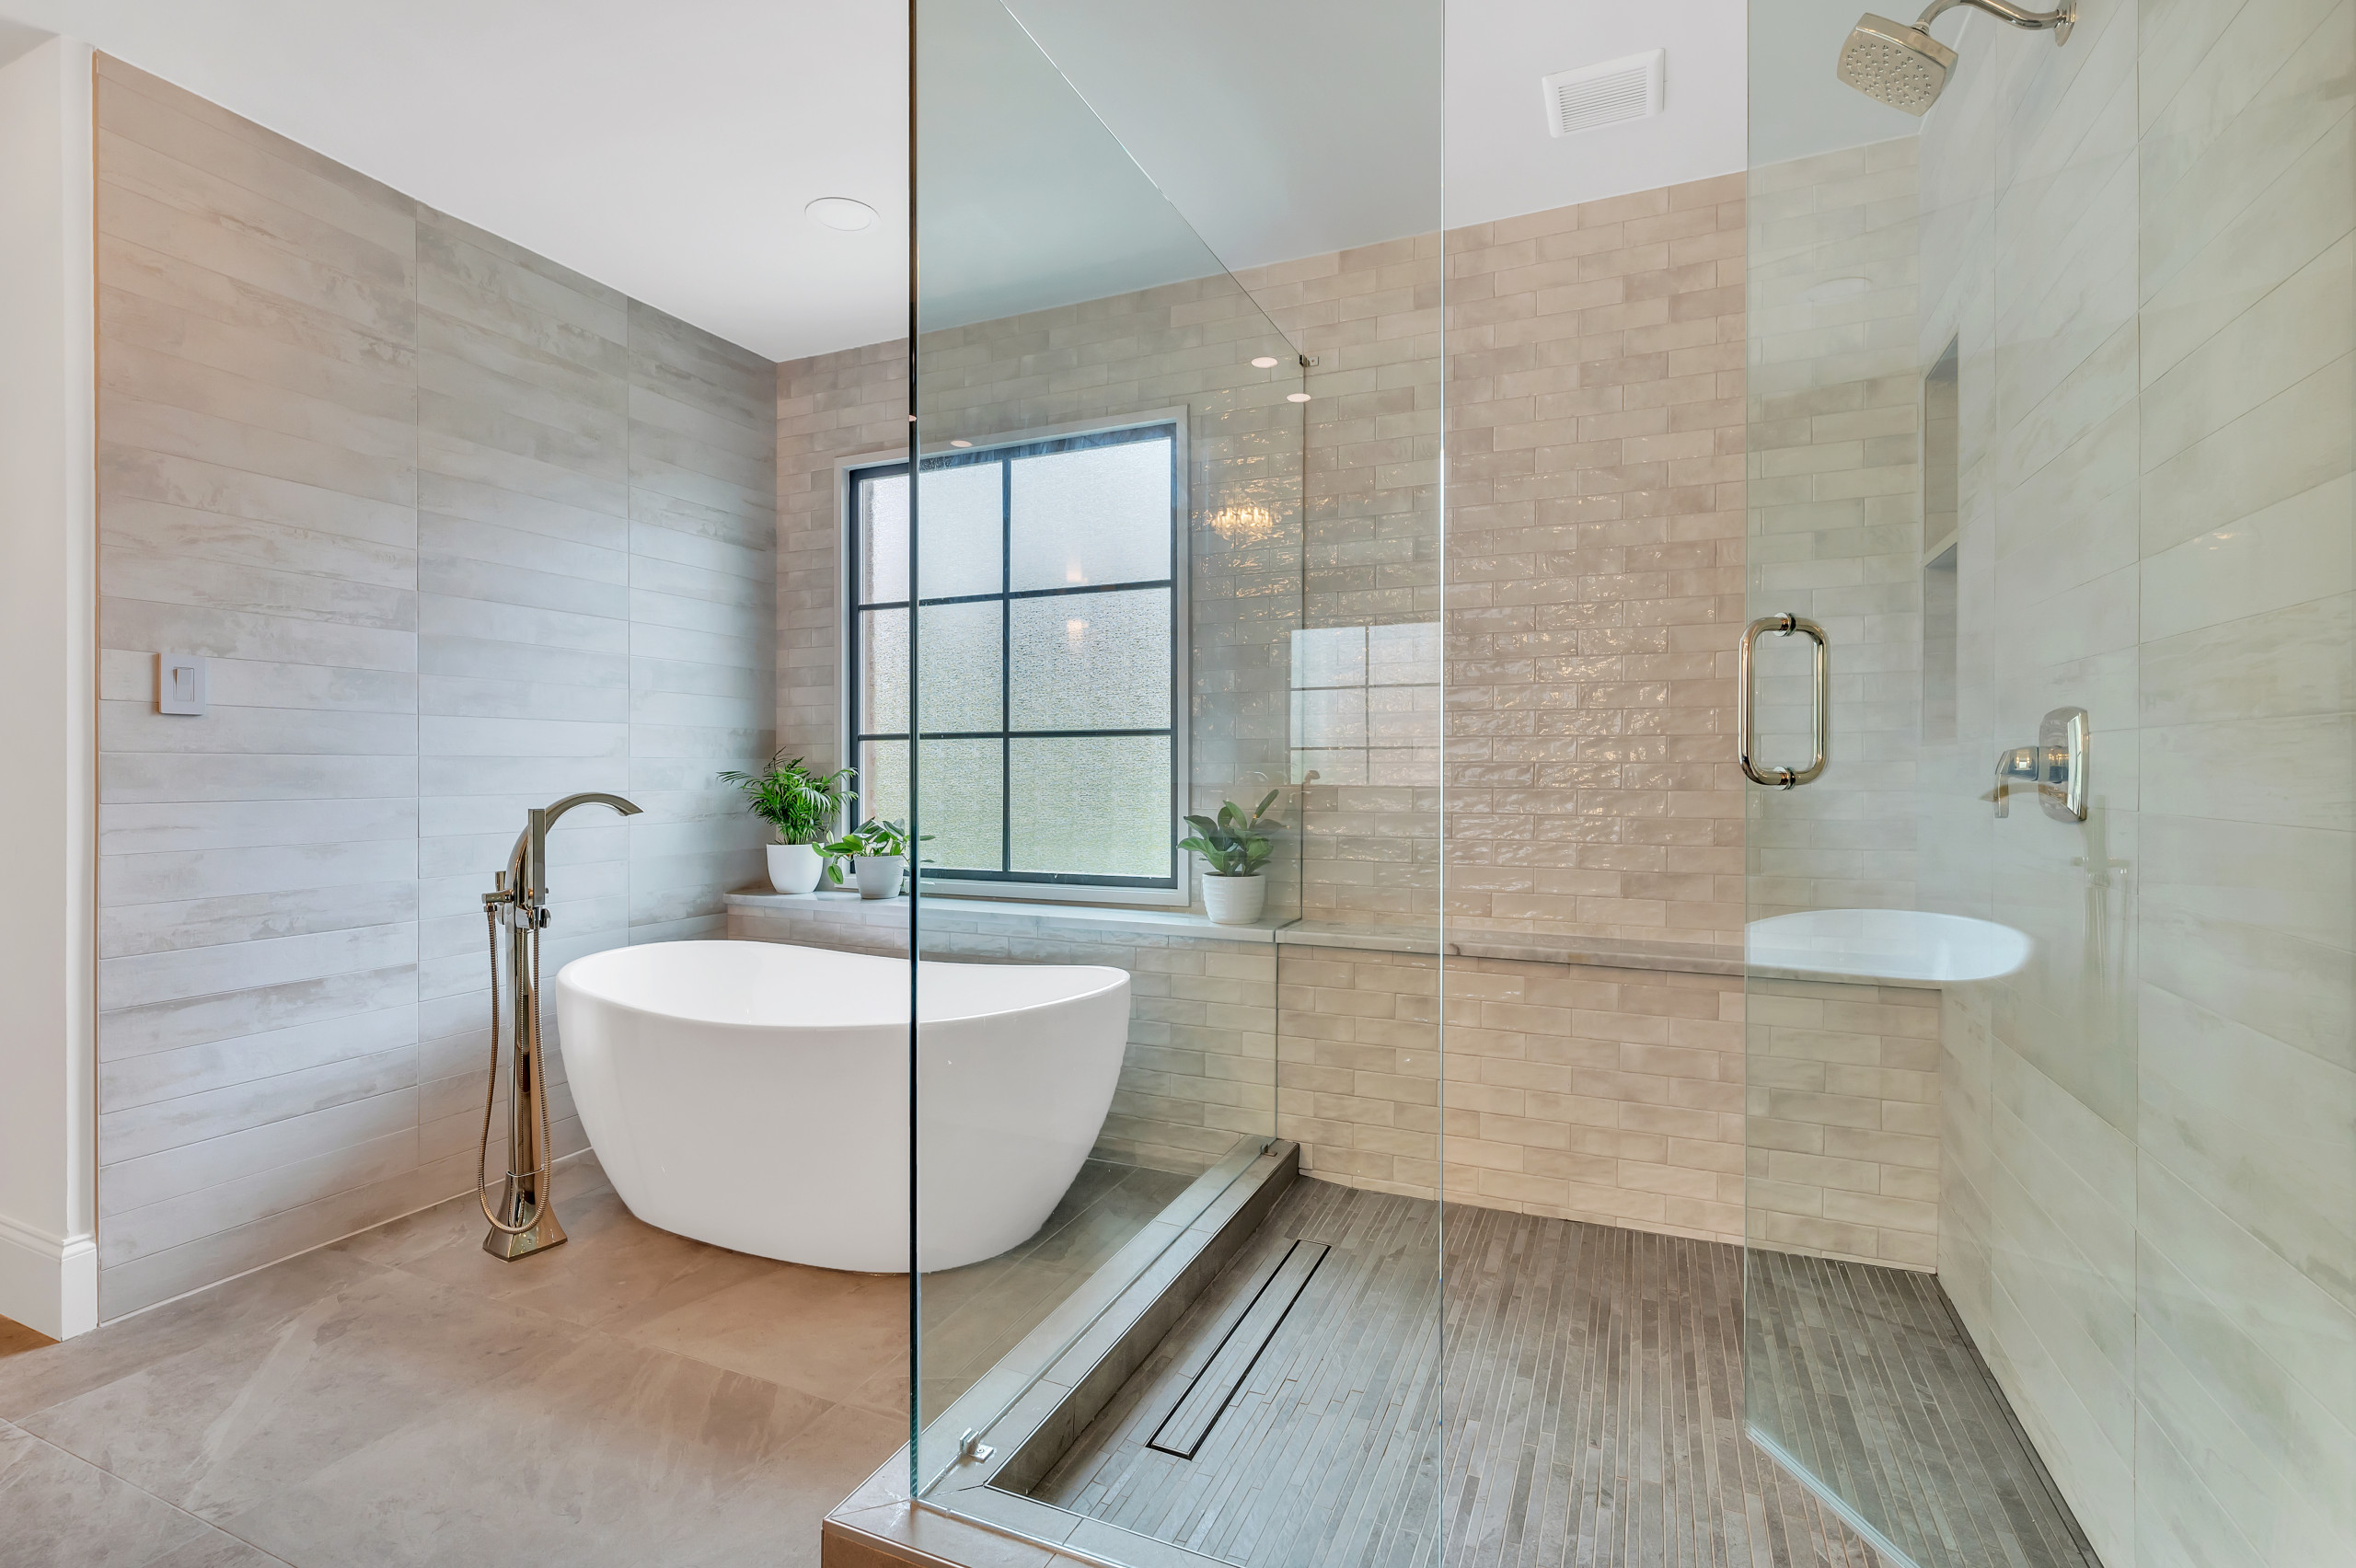 From Builder Grade From the 90’s to a Modern and Sophisticated Spa Feel